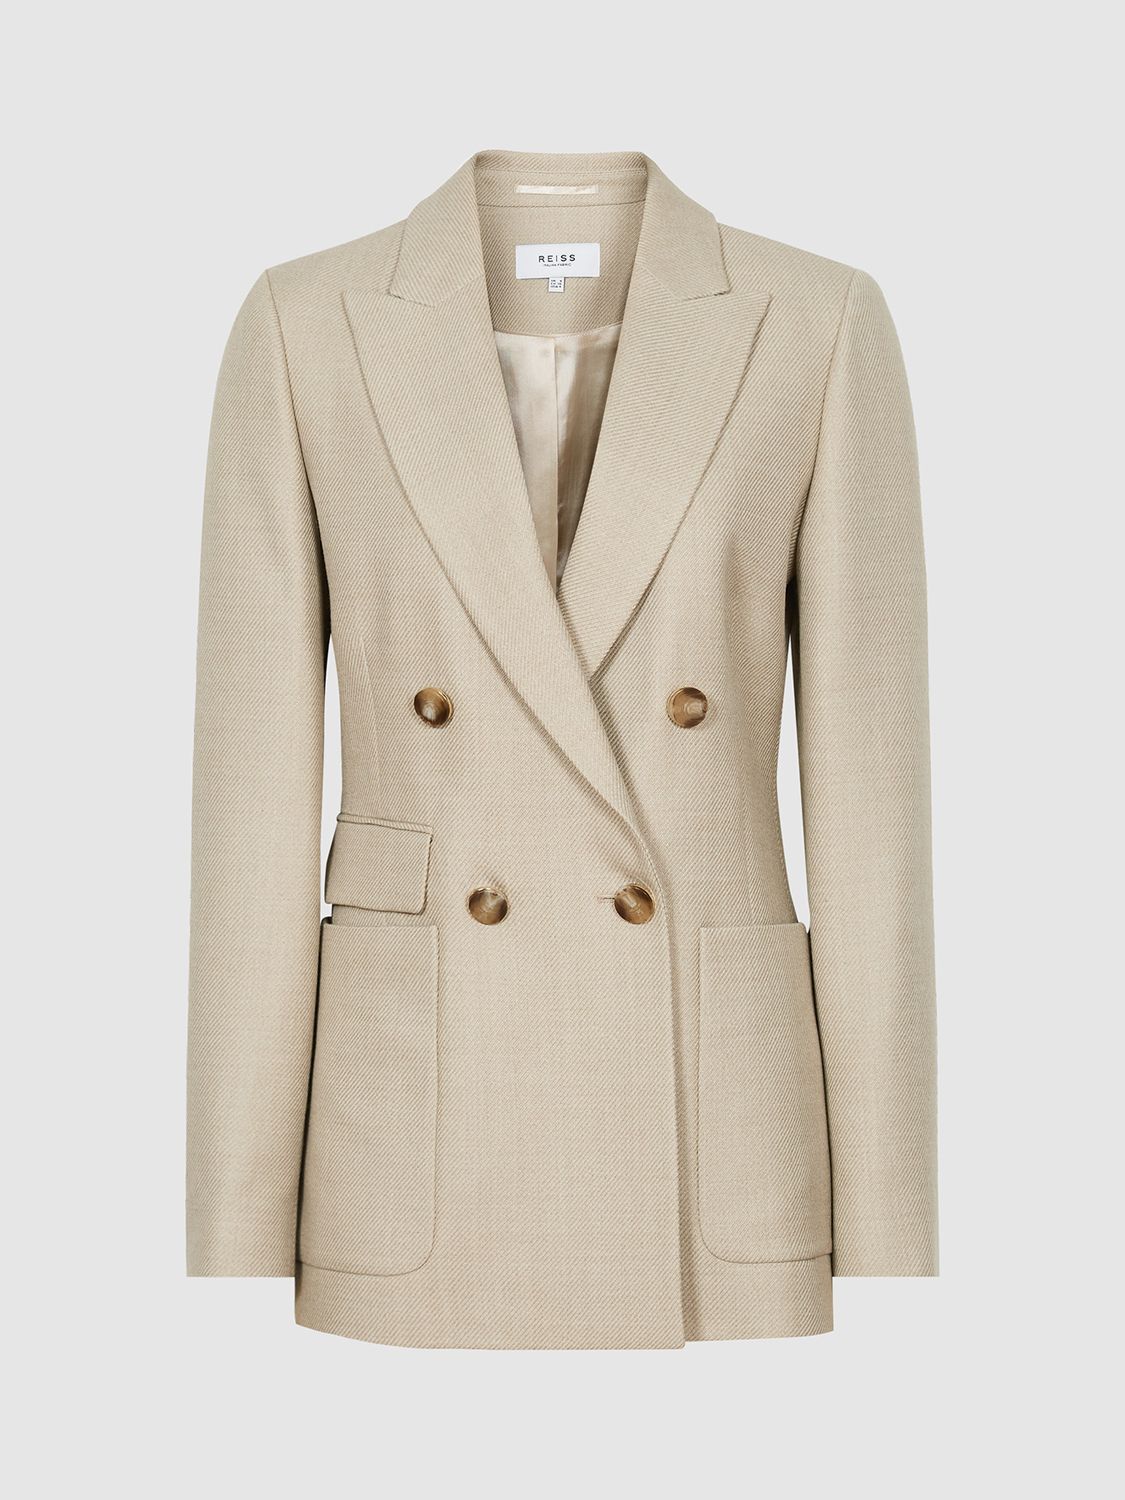 Reiss Larsson Double Breasted Blazer, Neutral at John Lewis & Partners